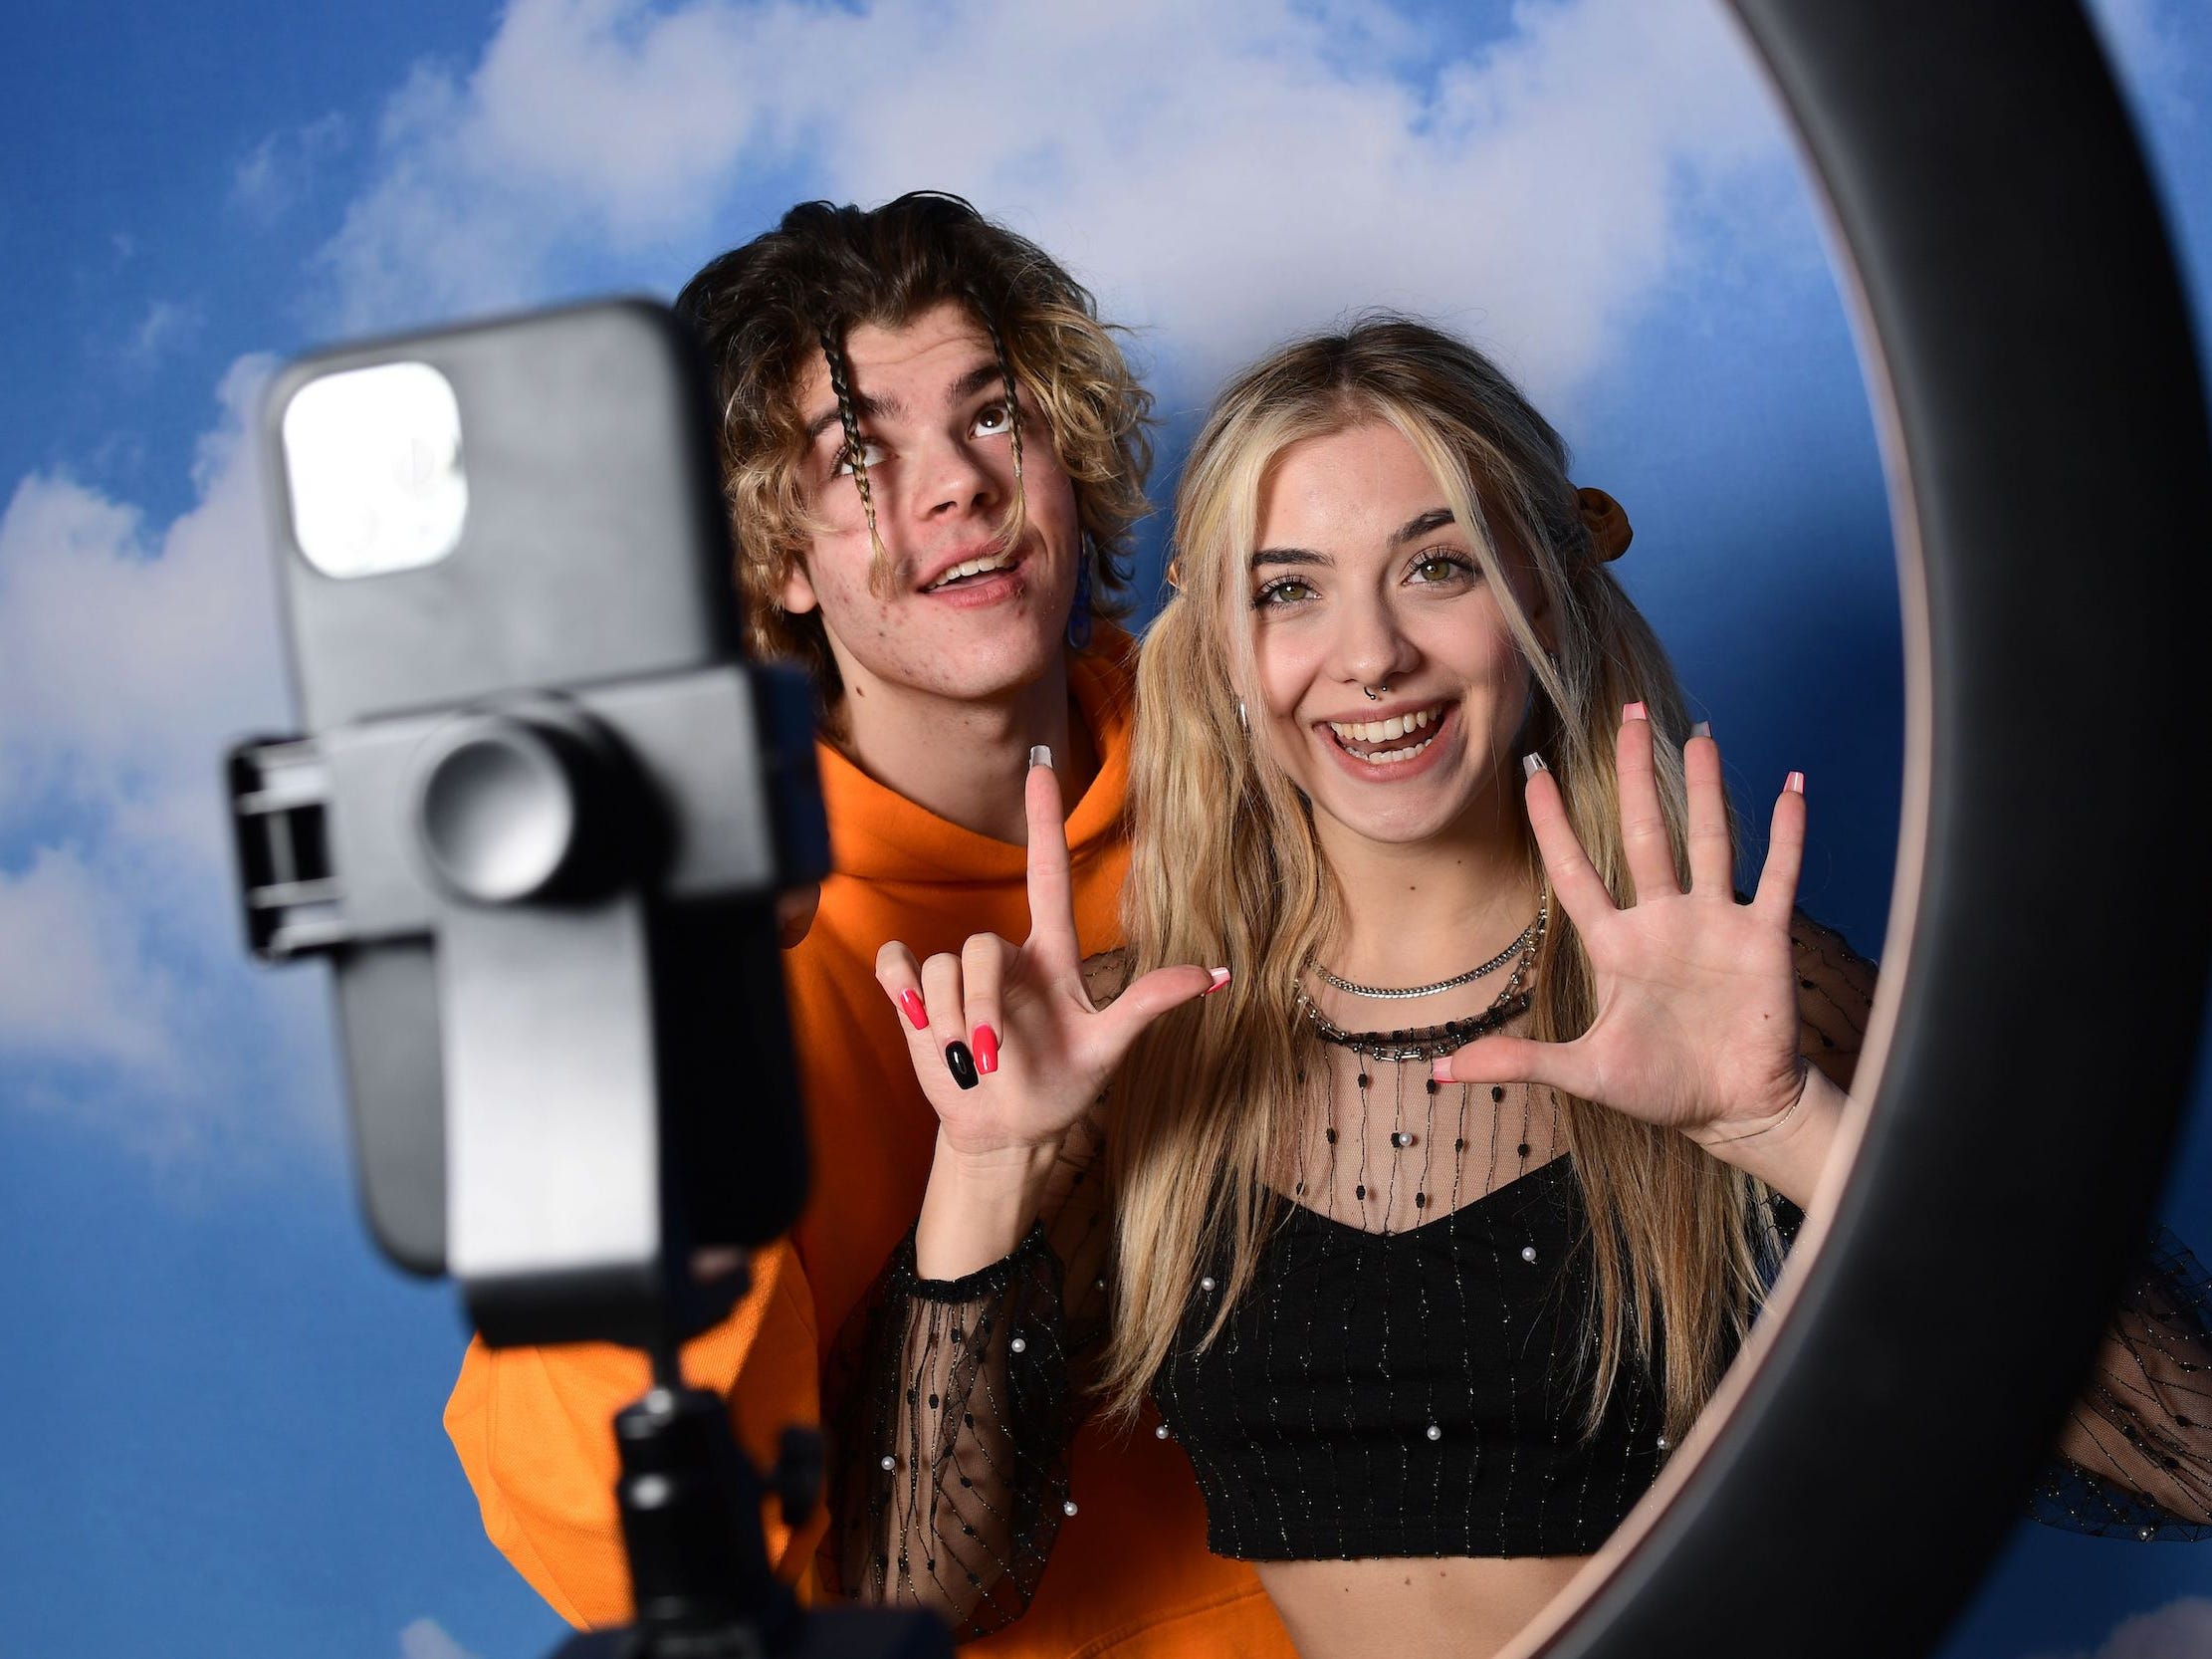 TikTok influencers Florin Vitan (L) and Alessia Lanza perform a video for the social network TikTok in the "Defhouse", a TikTok influencers incubator in Milan, on January 21, 2021.